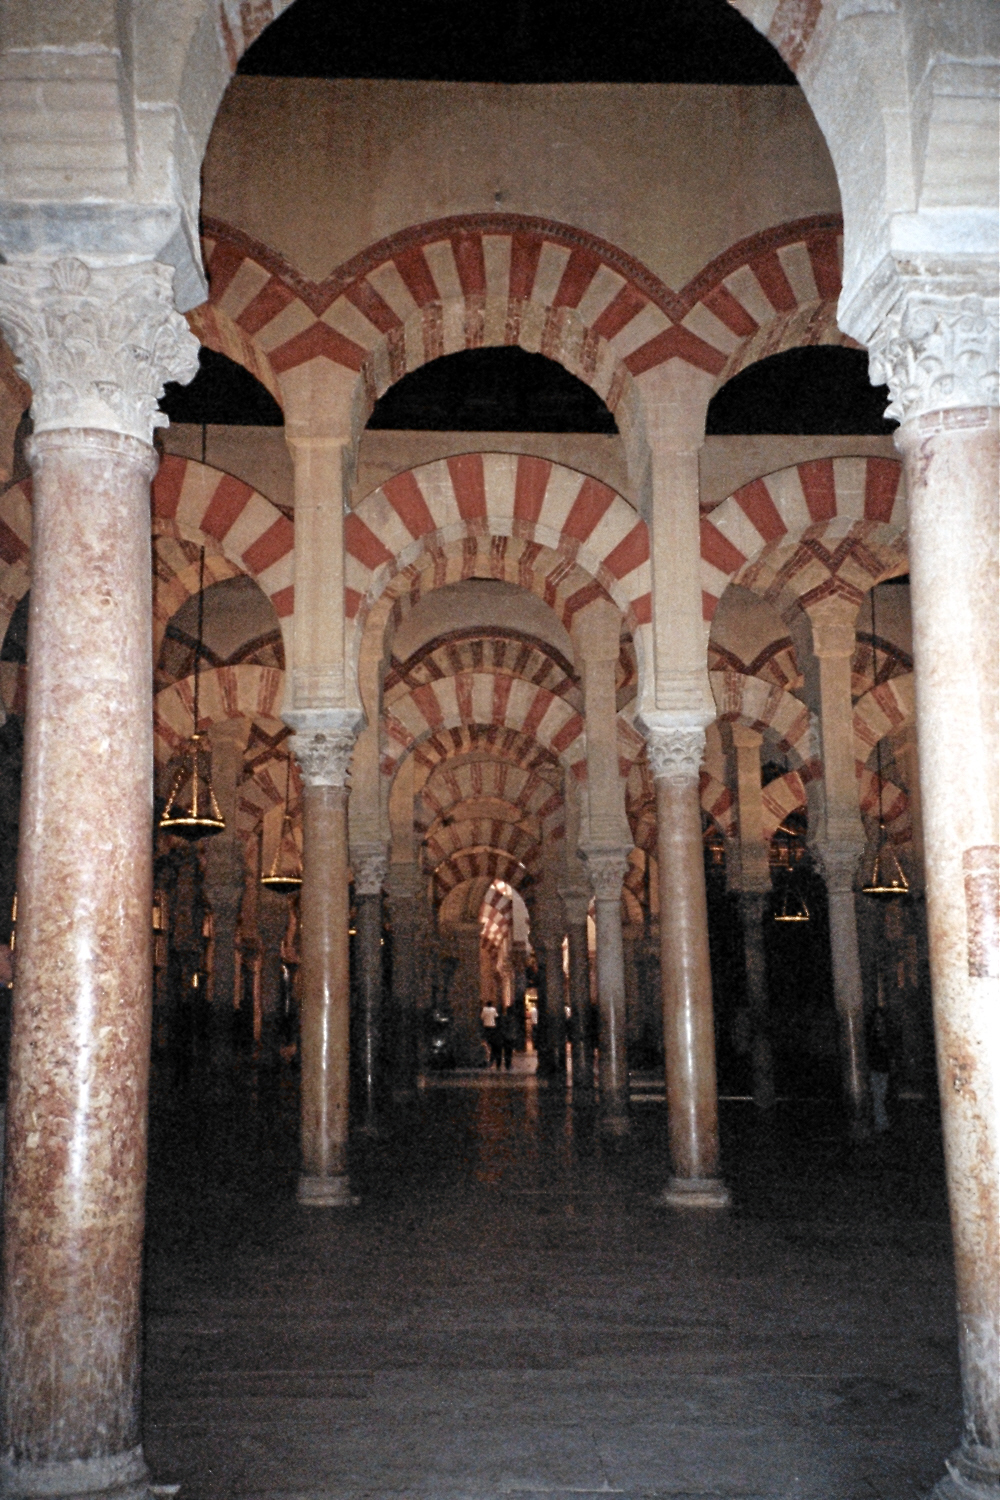 The Mezquita de Cordoba is most notable for its giant arches and its forest of over 856 (of an original 1,293) columns of jasper, onyx, marble, and granite.